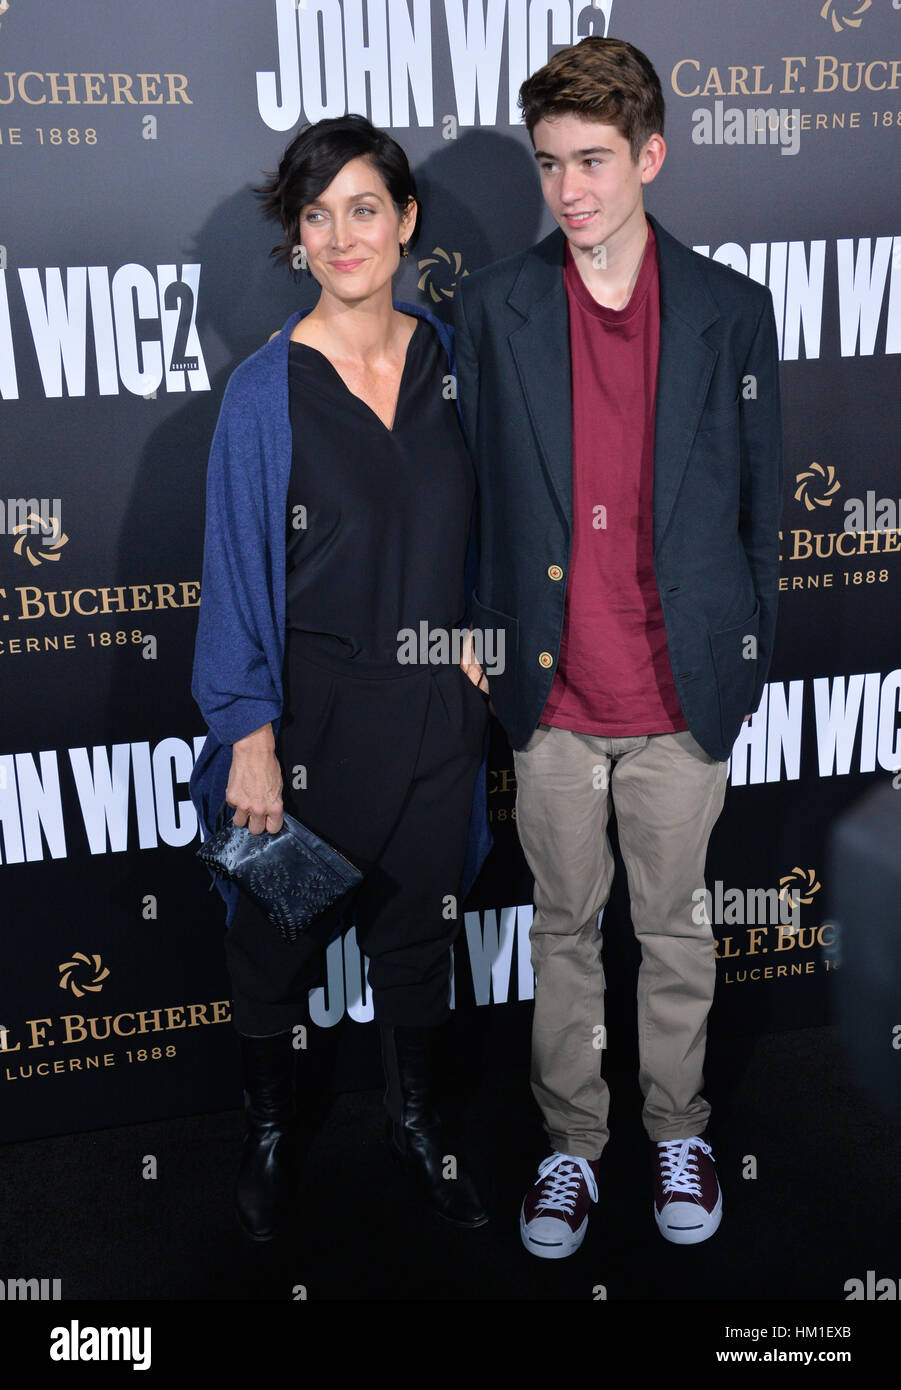 Los Angeles, California, USA. 30th January 2017. Actress Carrie-Ann Moss & son Owen Roy at the premiere of 'John Wick Chapter Two' at the Arclight Theatre, Hollywood.  Credit: Sarah Stewart/Alamy Live News Stock Photo